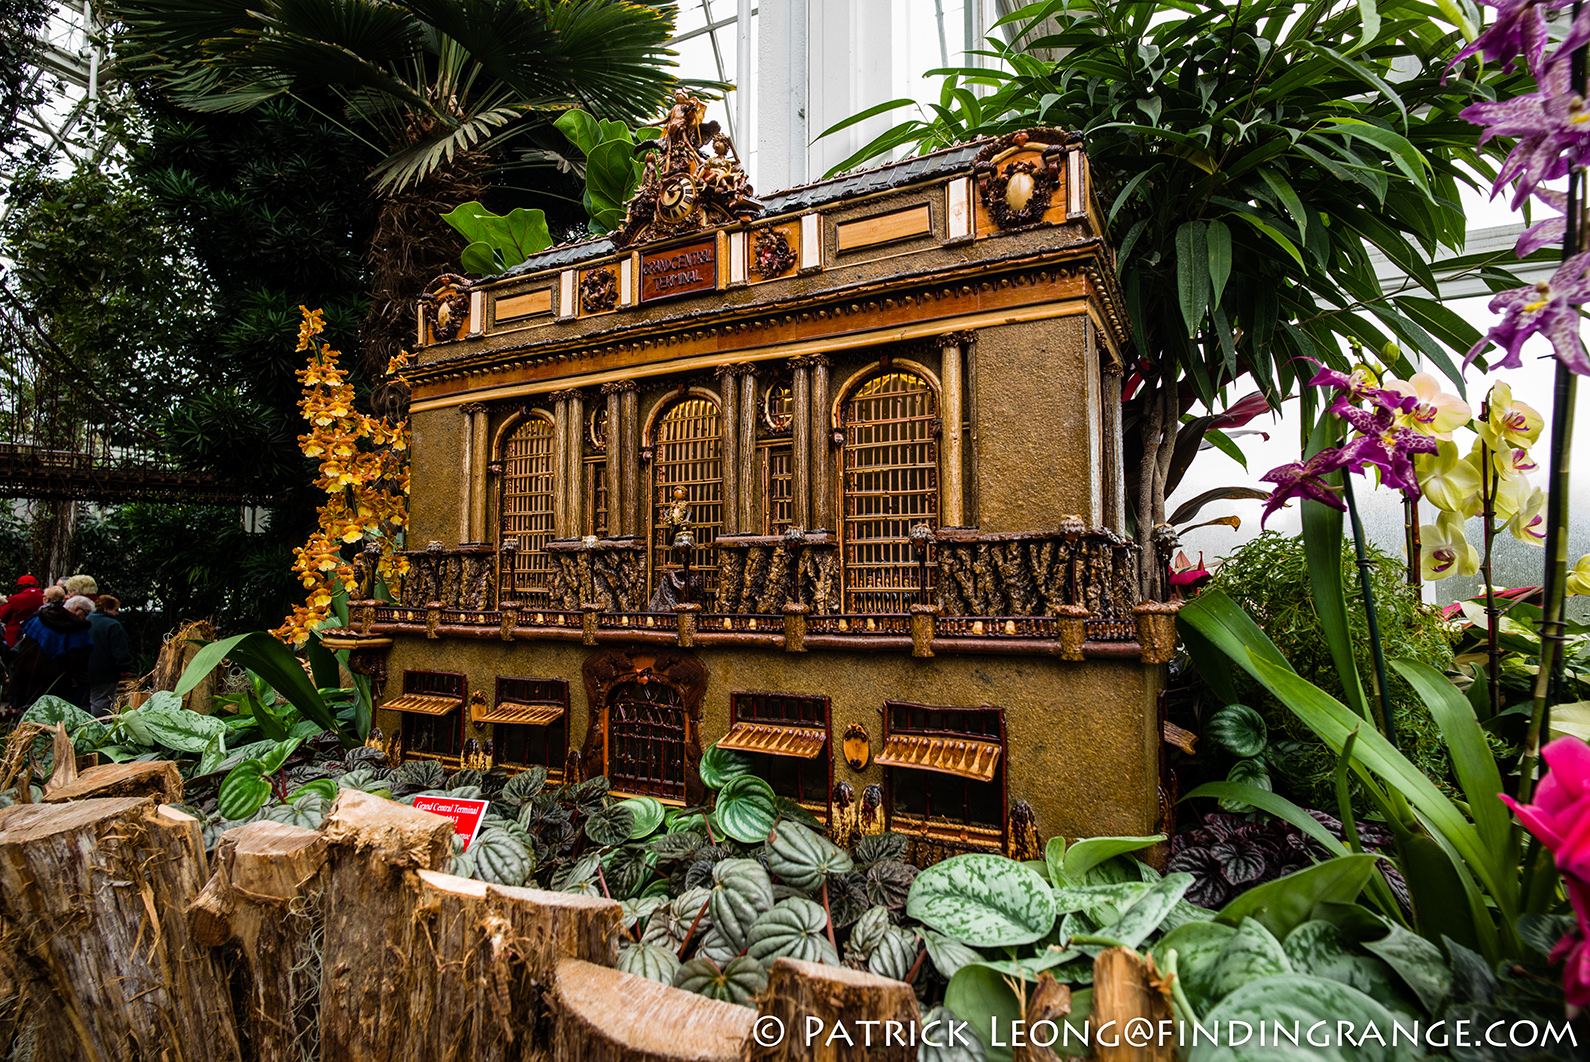 Holiday Train Show At The New York Botanical Garden